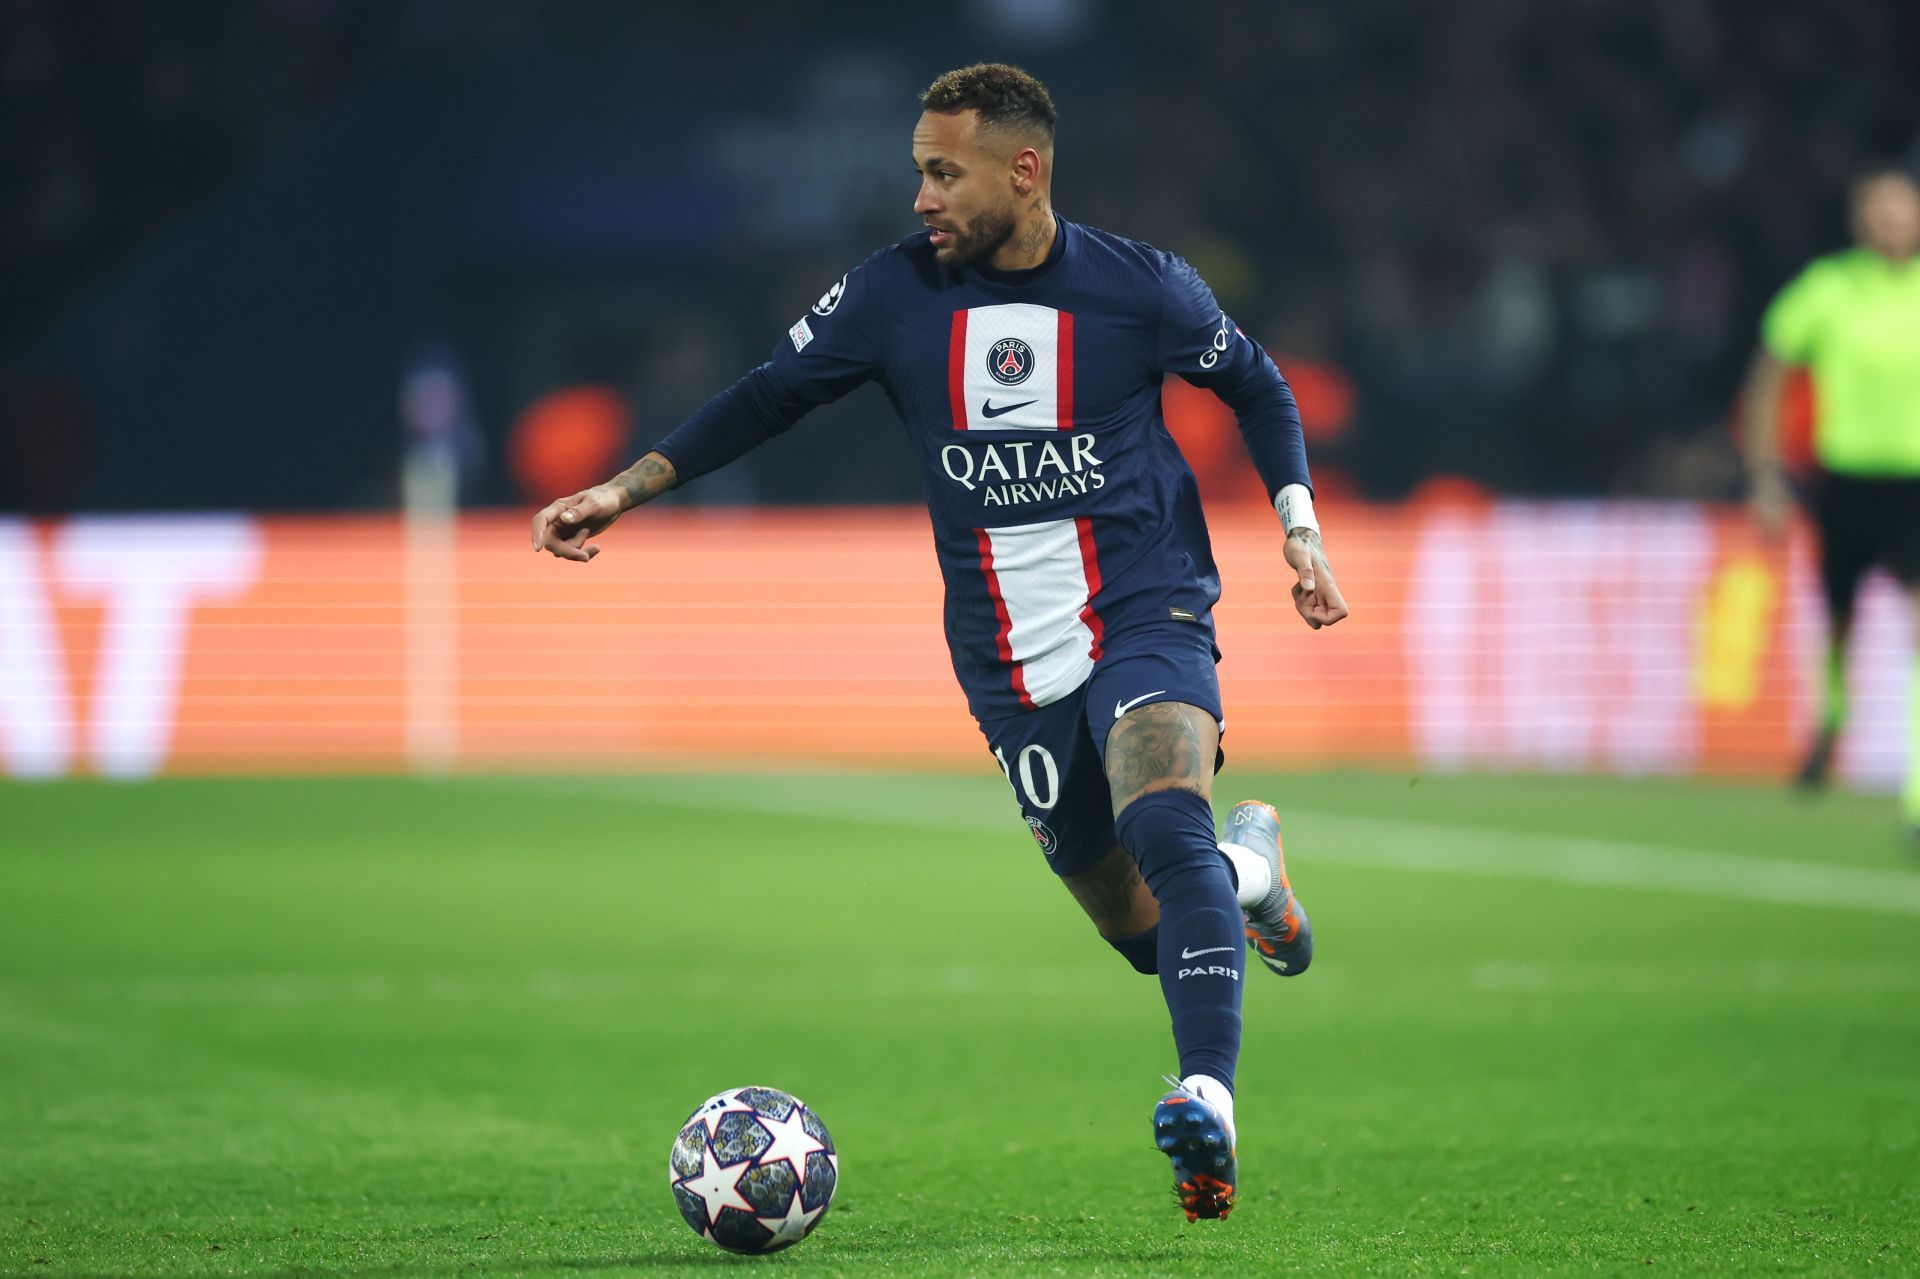 Neymar has been linked with an exit from the Parc des Princes recently.